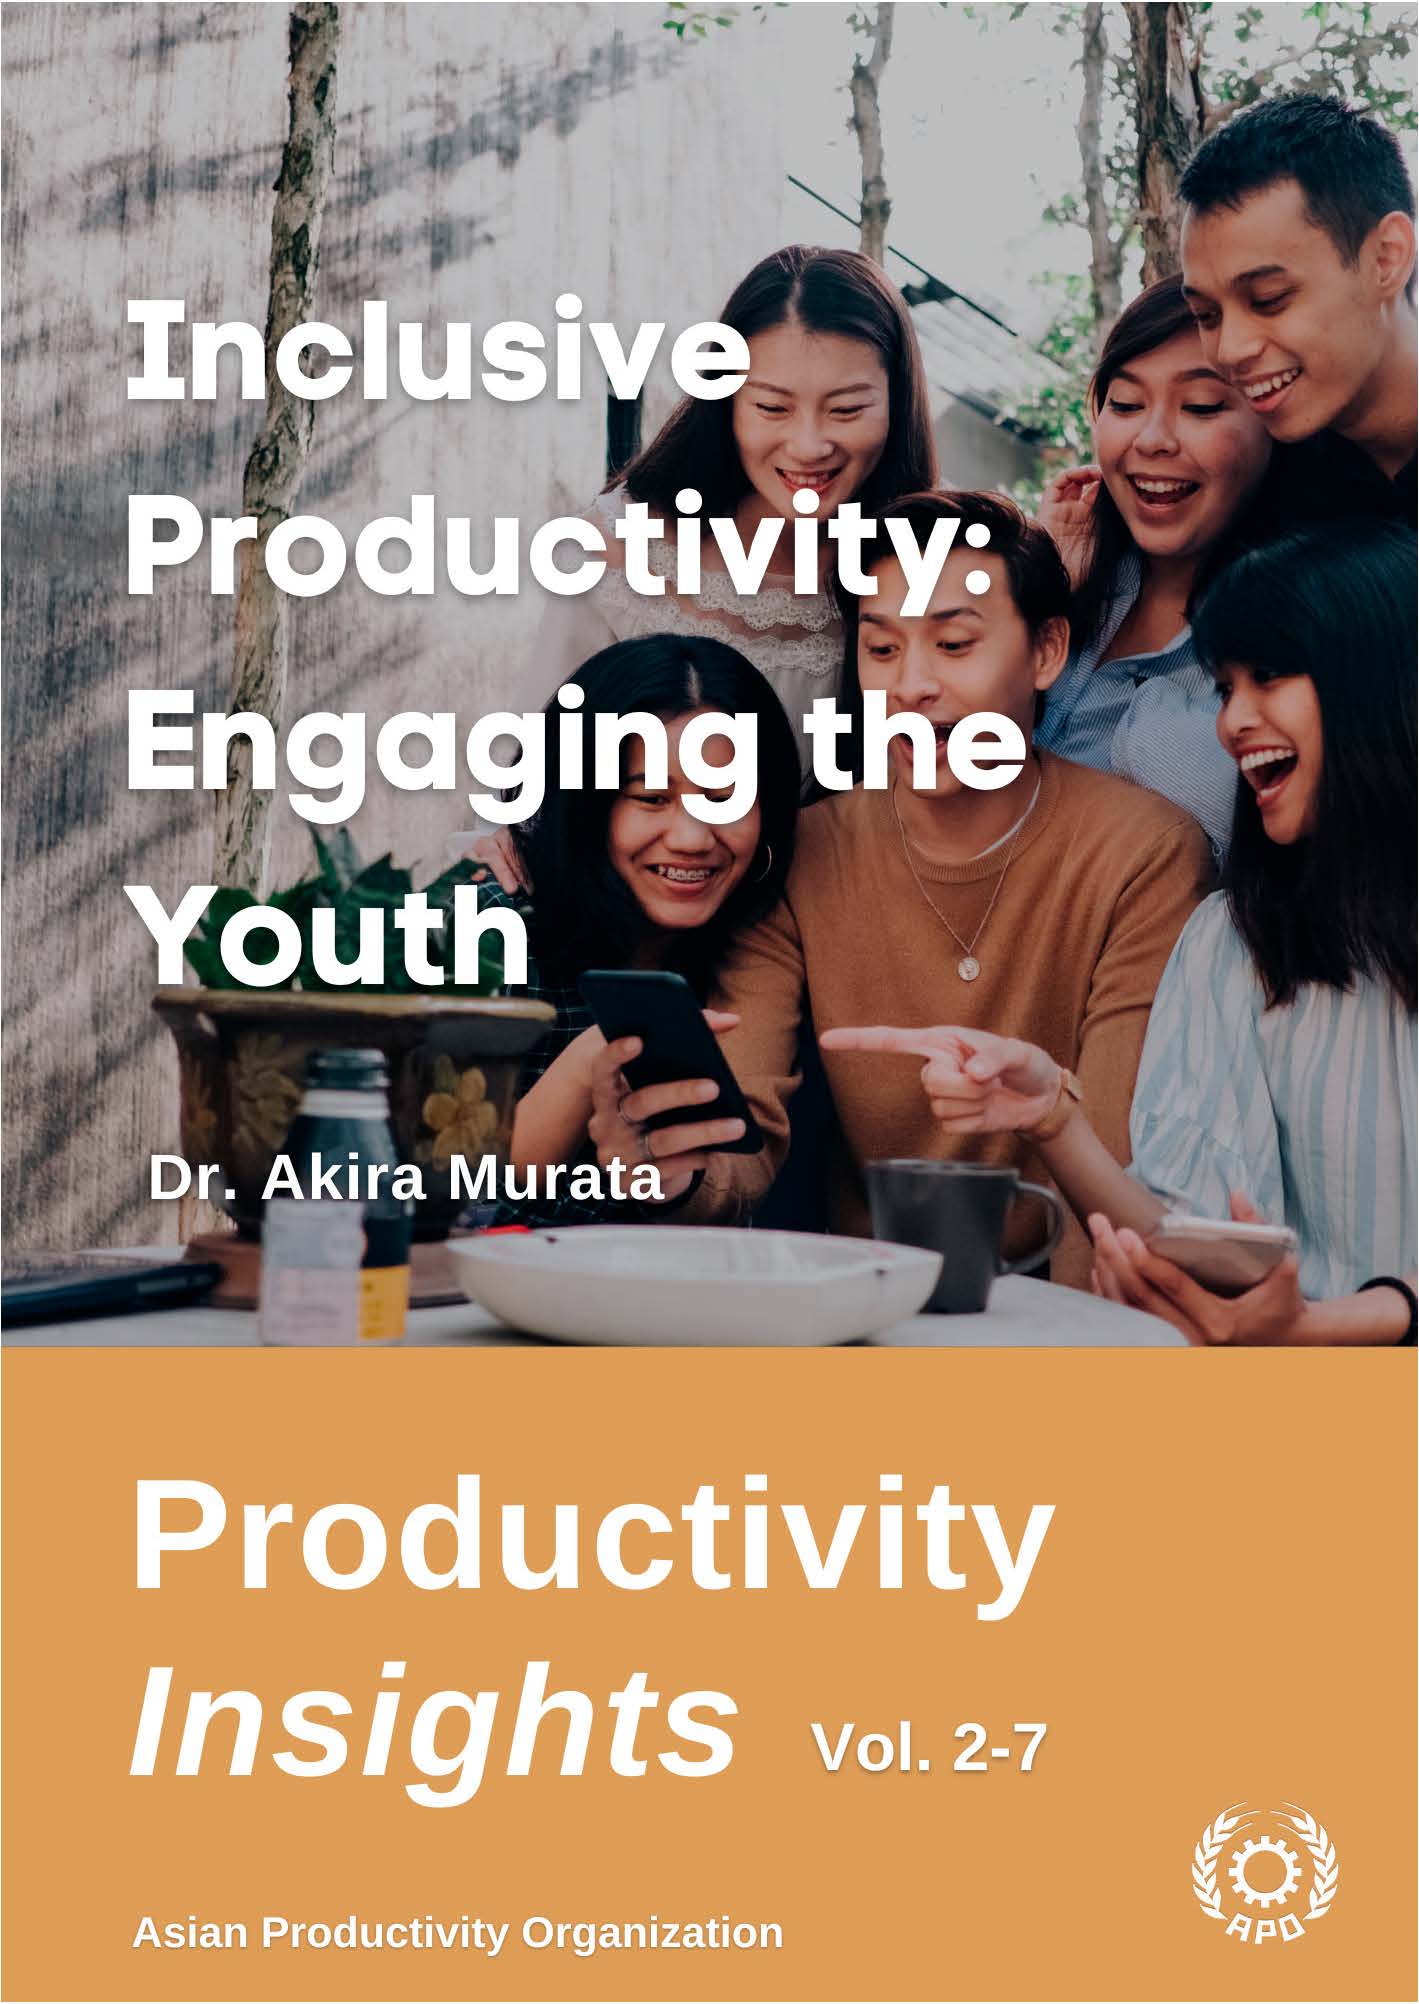 Inclusive Productivity: Engaging the Youth